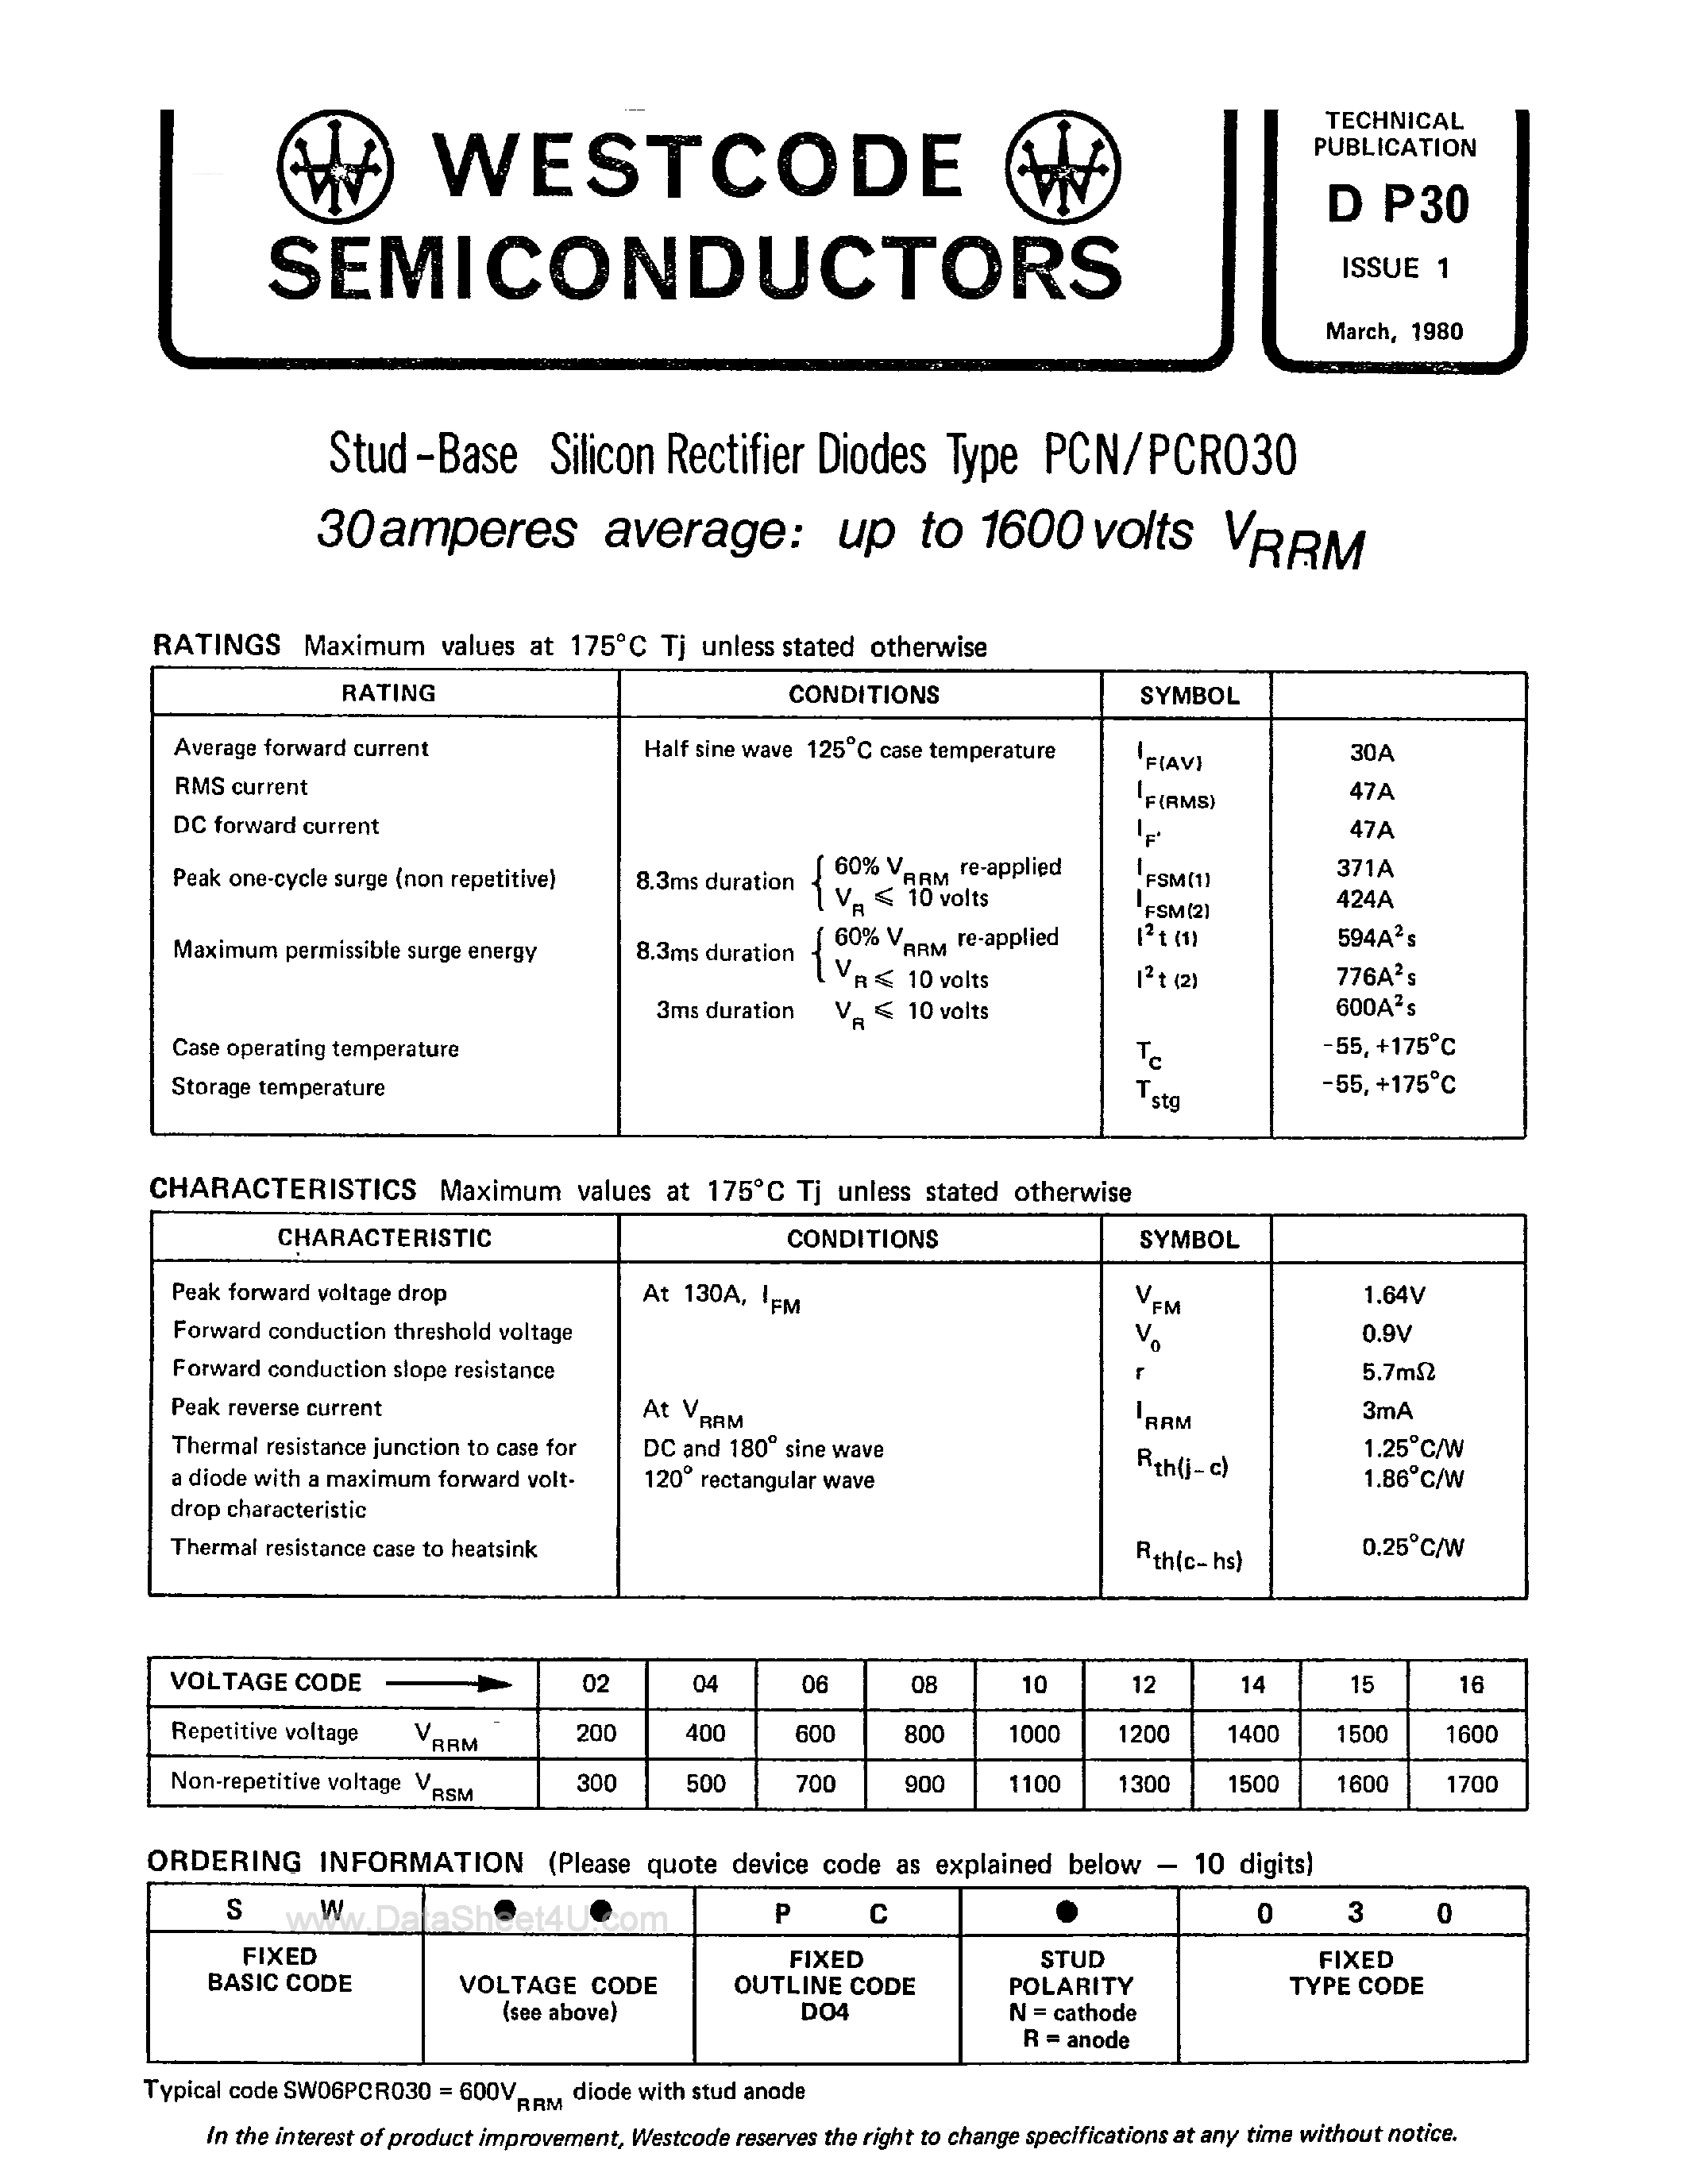 Даташит SW15PCN030 - Stud Base Silicon Rectifier Diodes страница 1